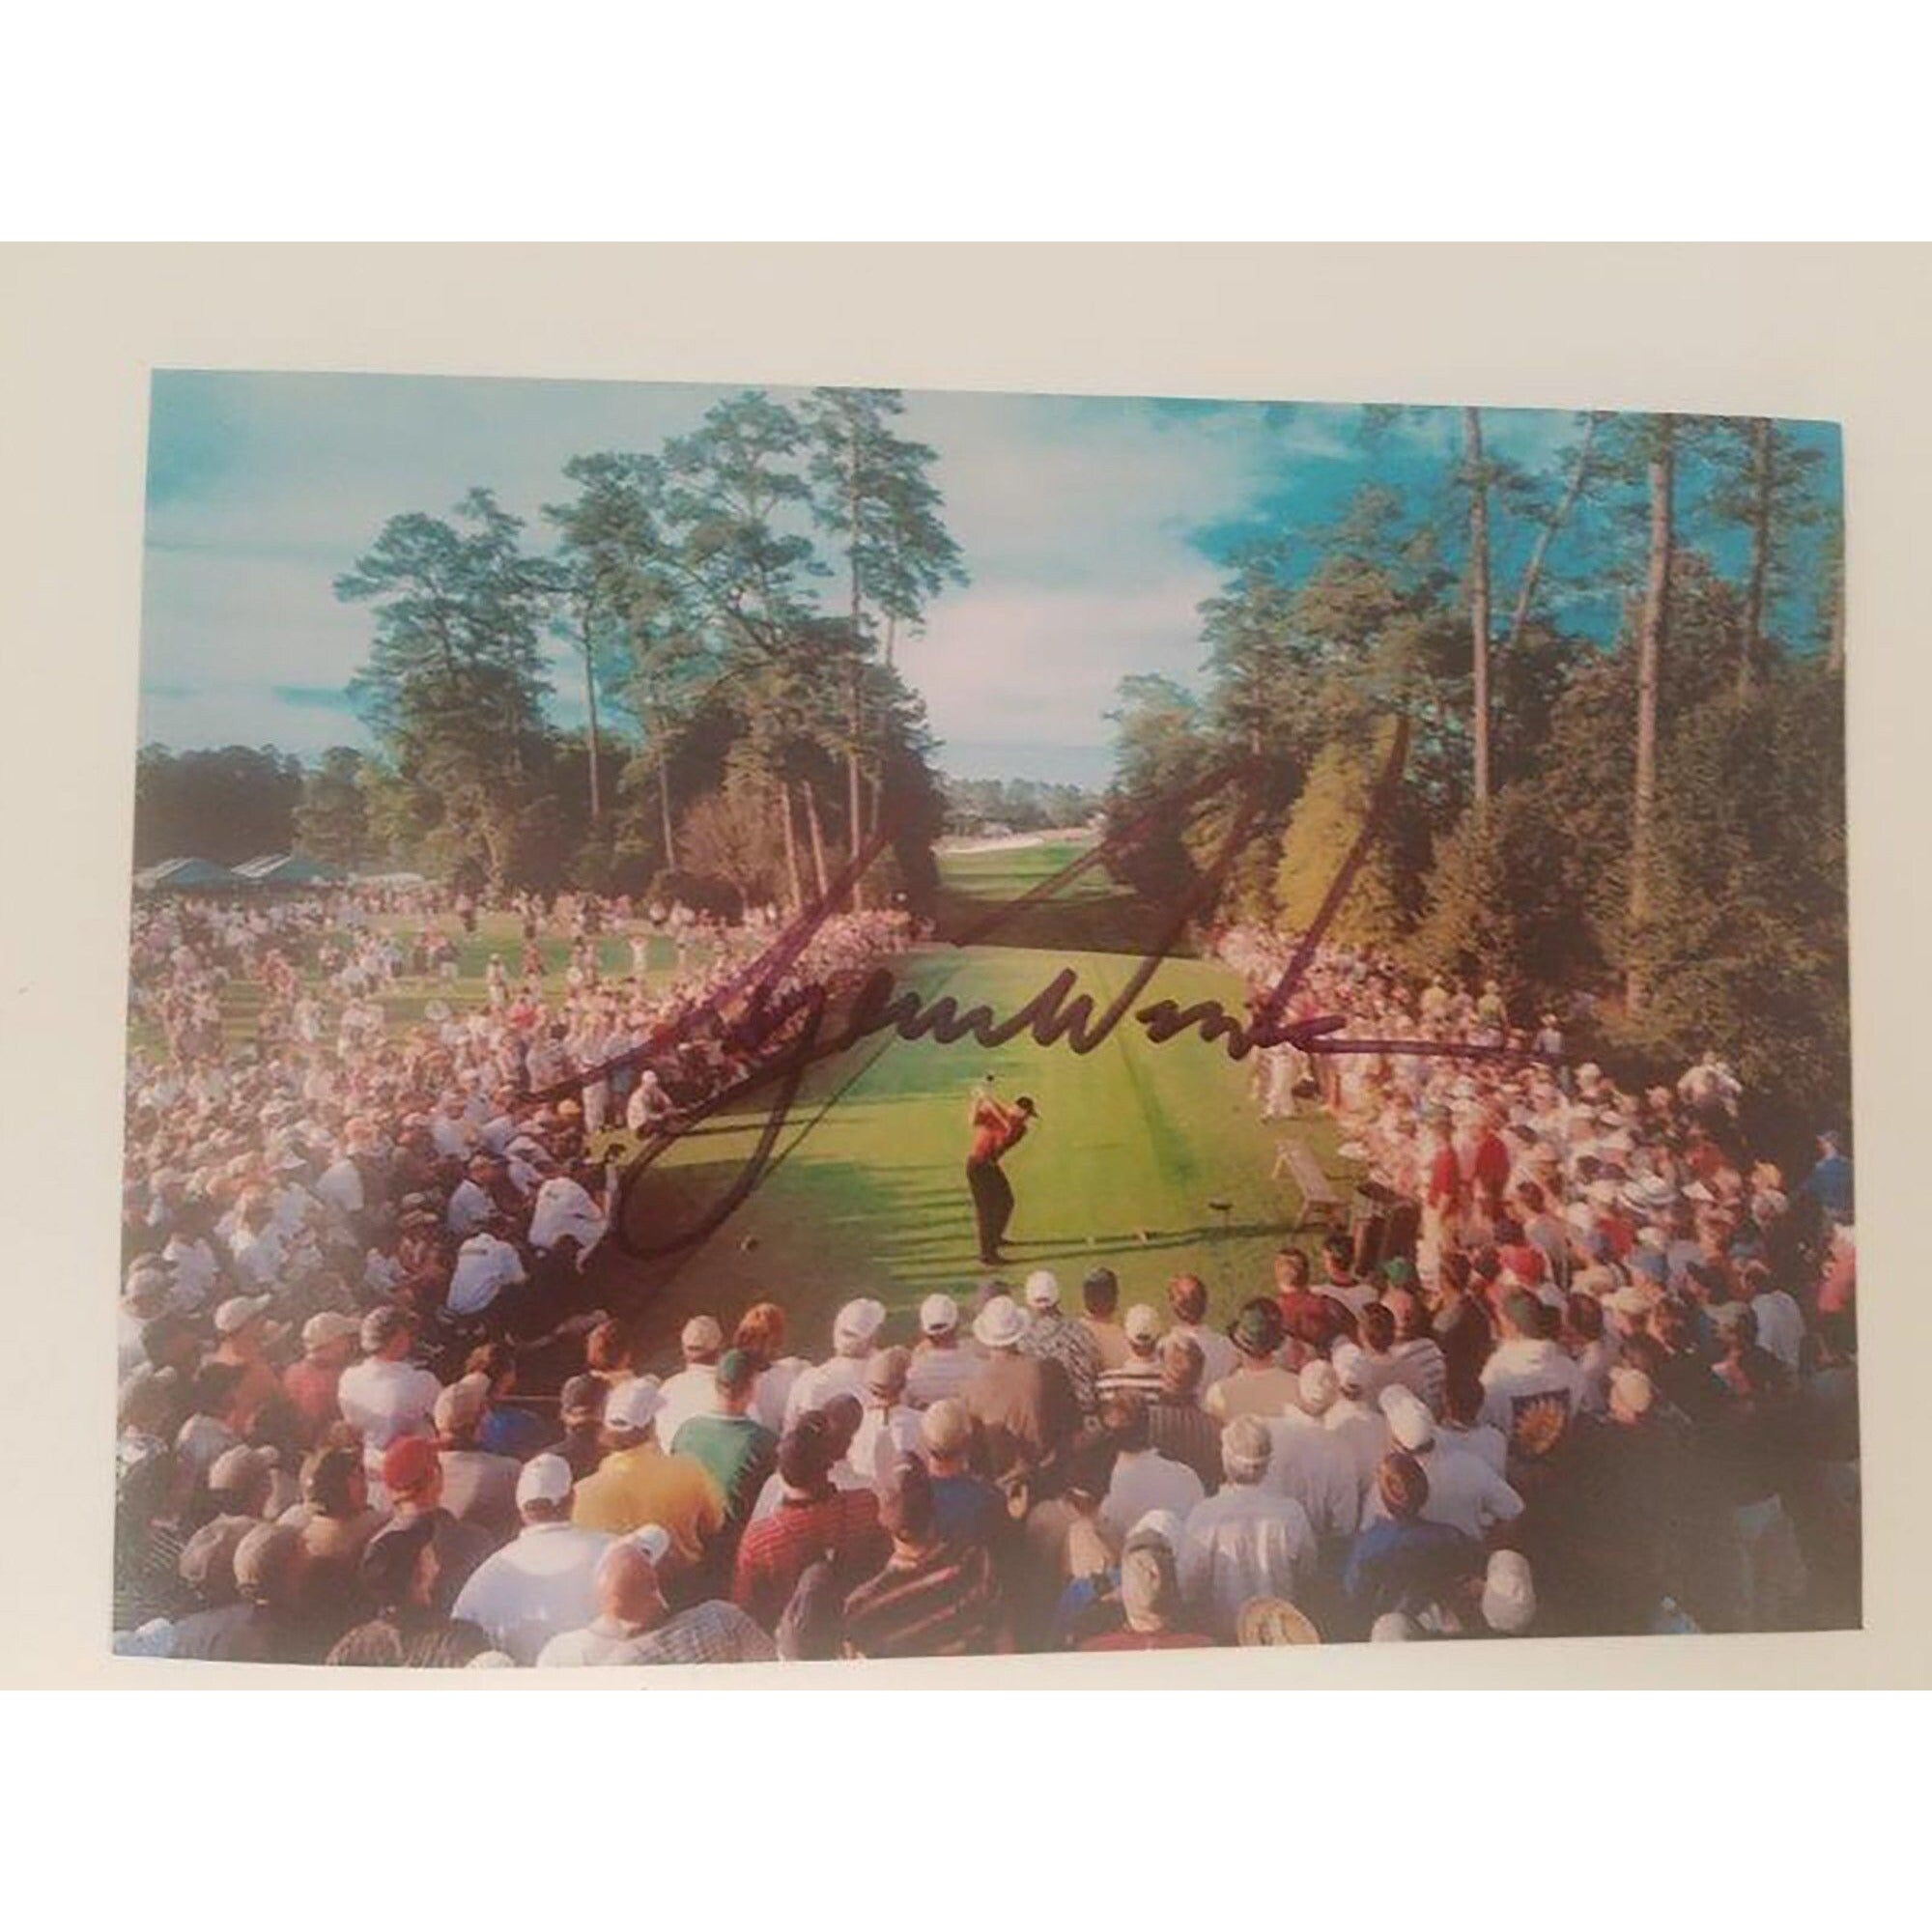 Tiger Woods 5 x 7 photo signed with proof